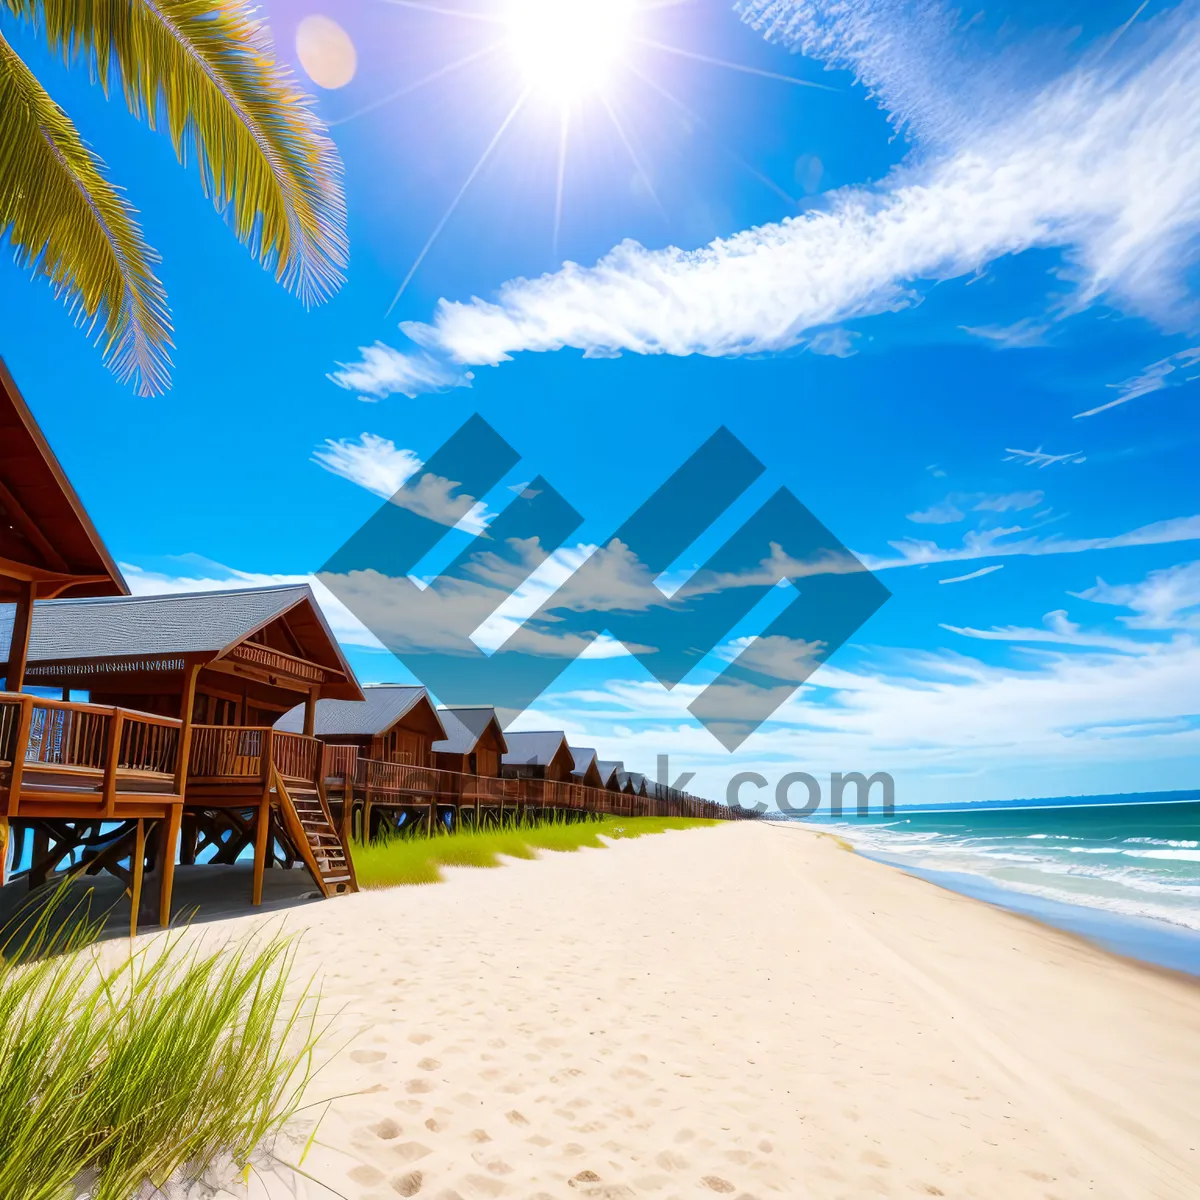 Picture of Turquoise Paradise: Tranquil Beach Resort by the Sea